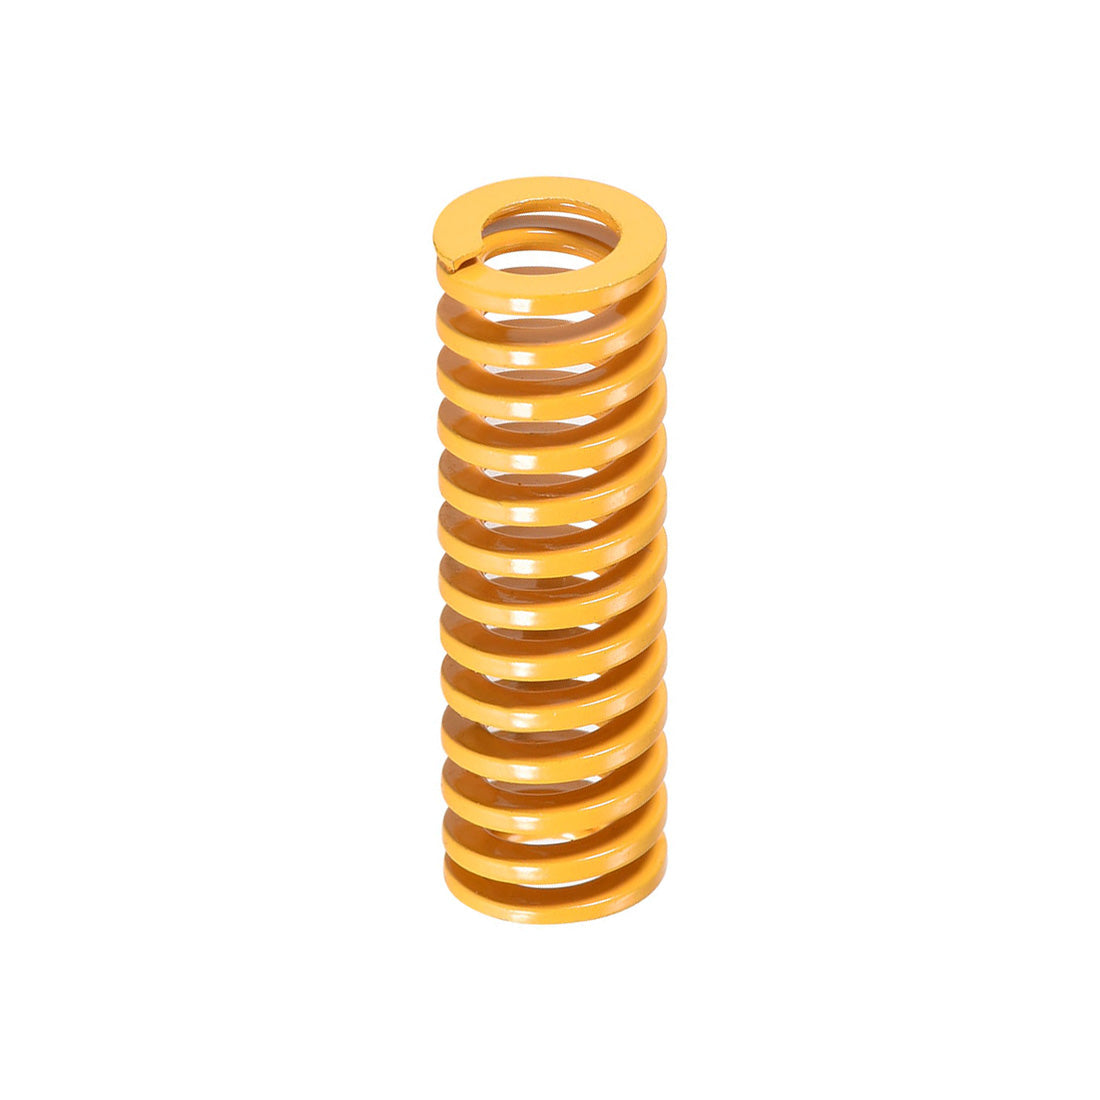 uxcell Uxcell Heated Bed Springs for 3D Printer Light Load Compression Spring, 8 x 25 mm 4pcs